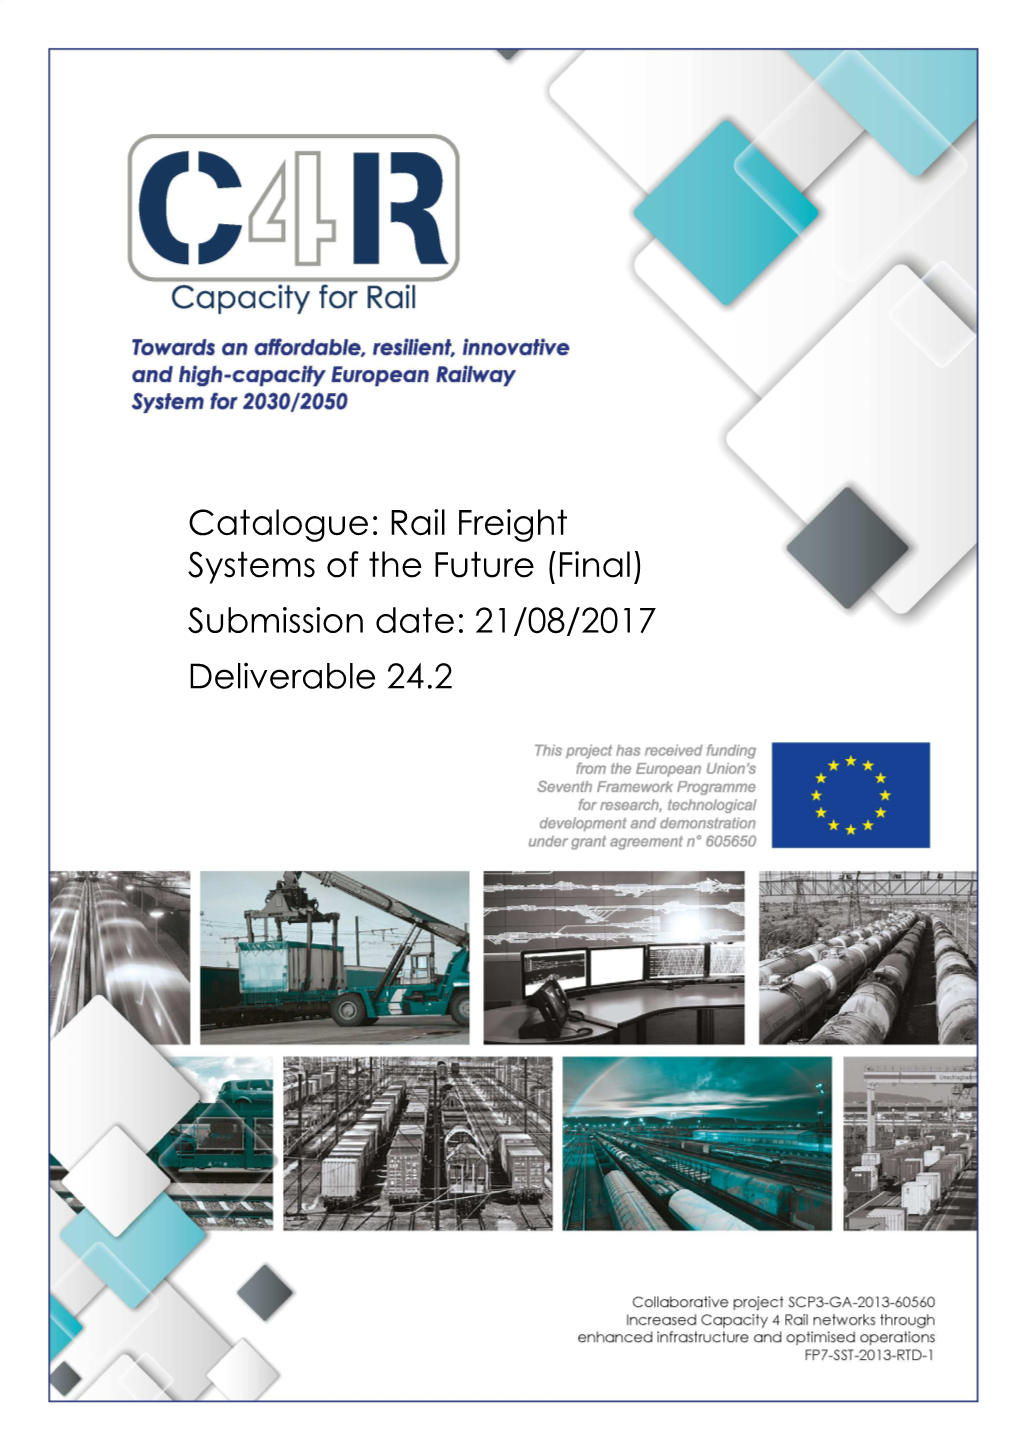 Rail Freight Systems of the Future (Final) Submission Date: 21/08/2017 Deliverable 24.2